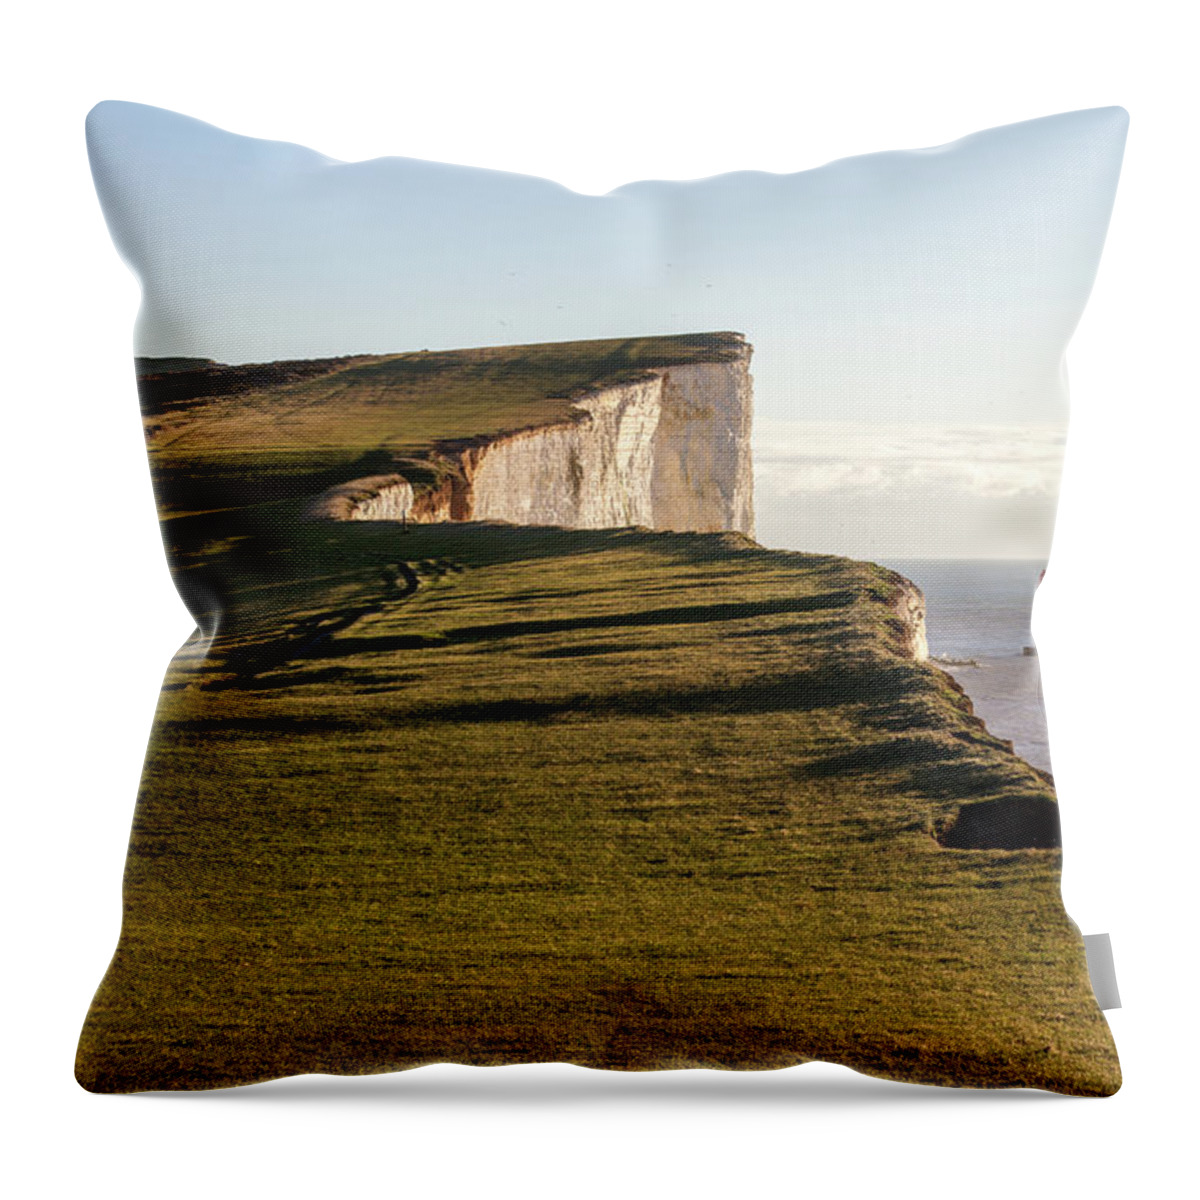 Tranquility Throw Pillow featuring the photograph View Of Beachy Head Coastline by Paul Mansfield Photography